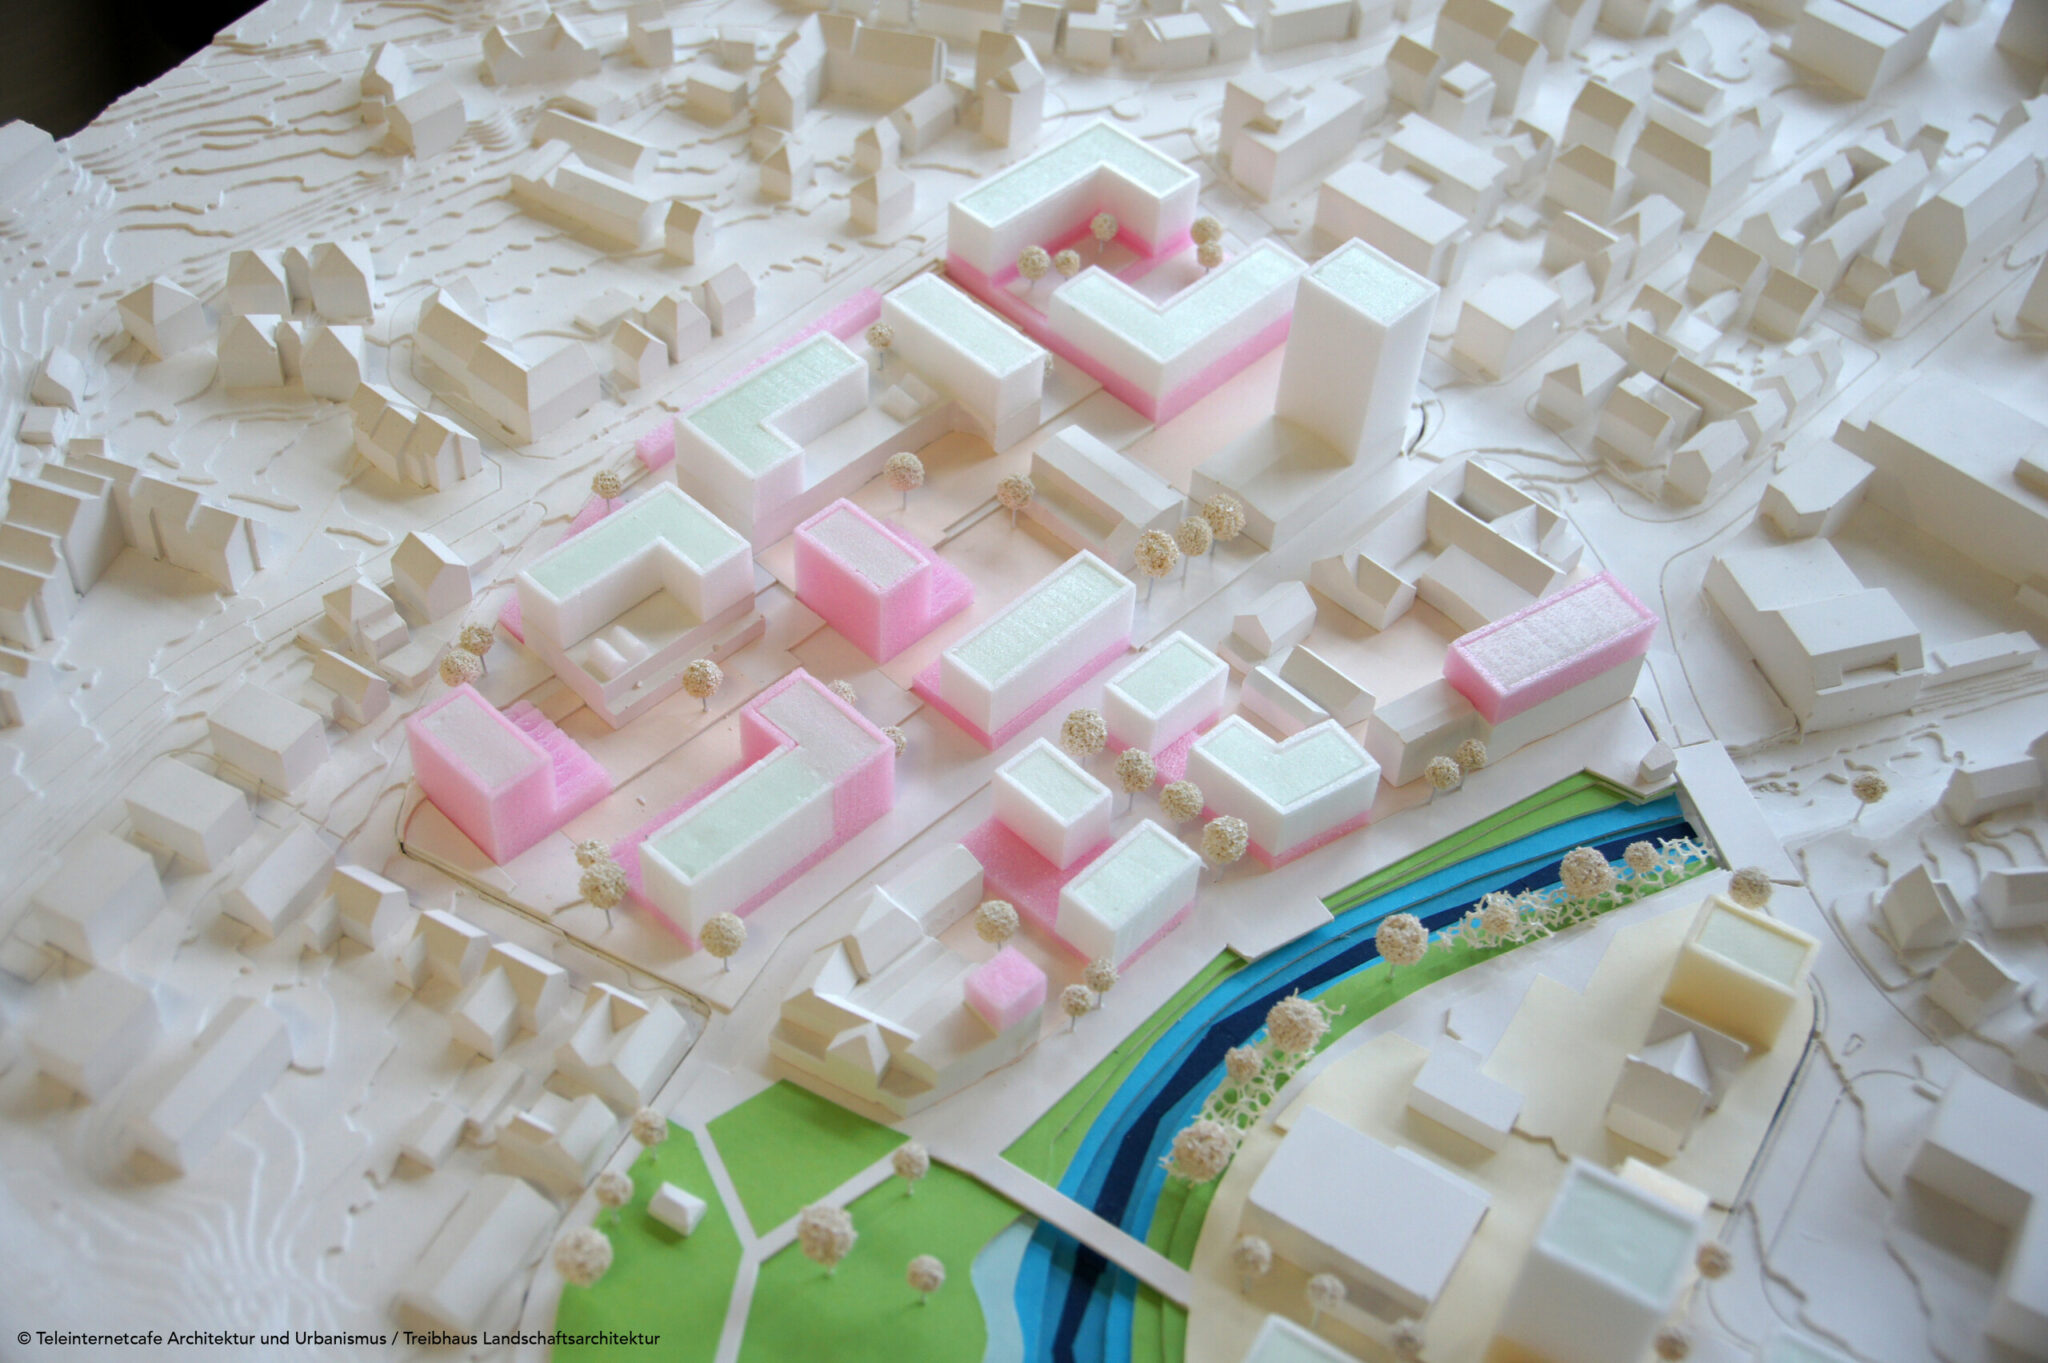 Competition »Backnang West Neighbourhood«. Model of the winning design by Teleinternetcafe Architecture and Urbanism together with Treibhaus Landscape Architecture (Credits: Teleinternetcafe/Treibhaus)